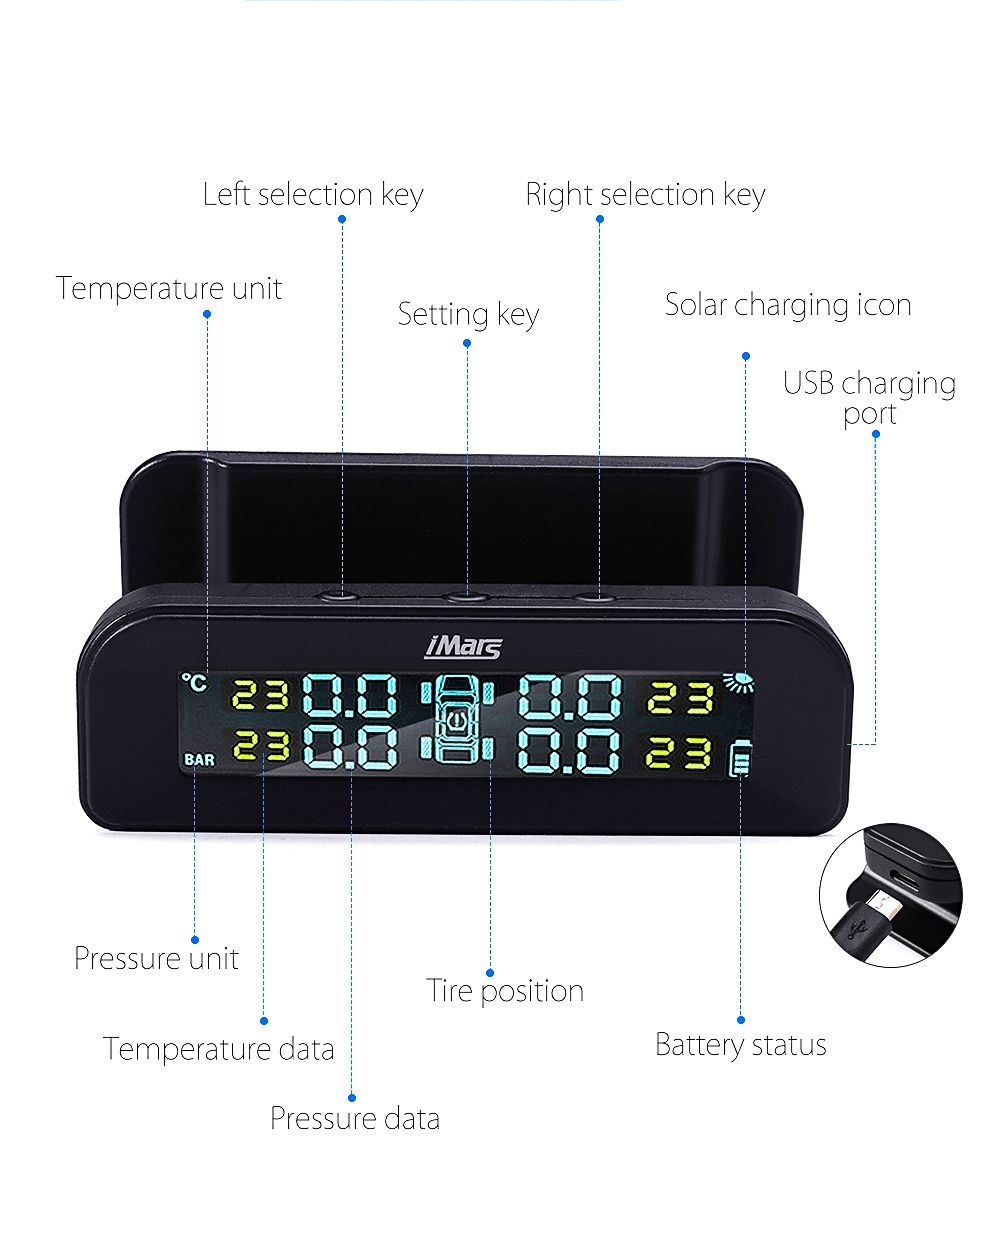 iMars-T260-Solar-Tire-Pressure-Monitor-System-Real-time-Tester-LCD-Screen-4-External-Sensors-Auto-Po-1646161